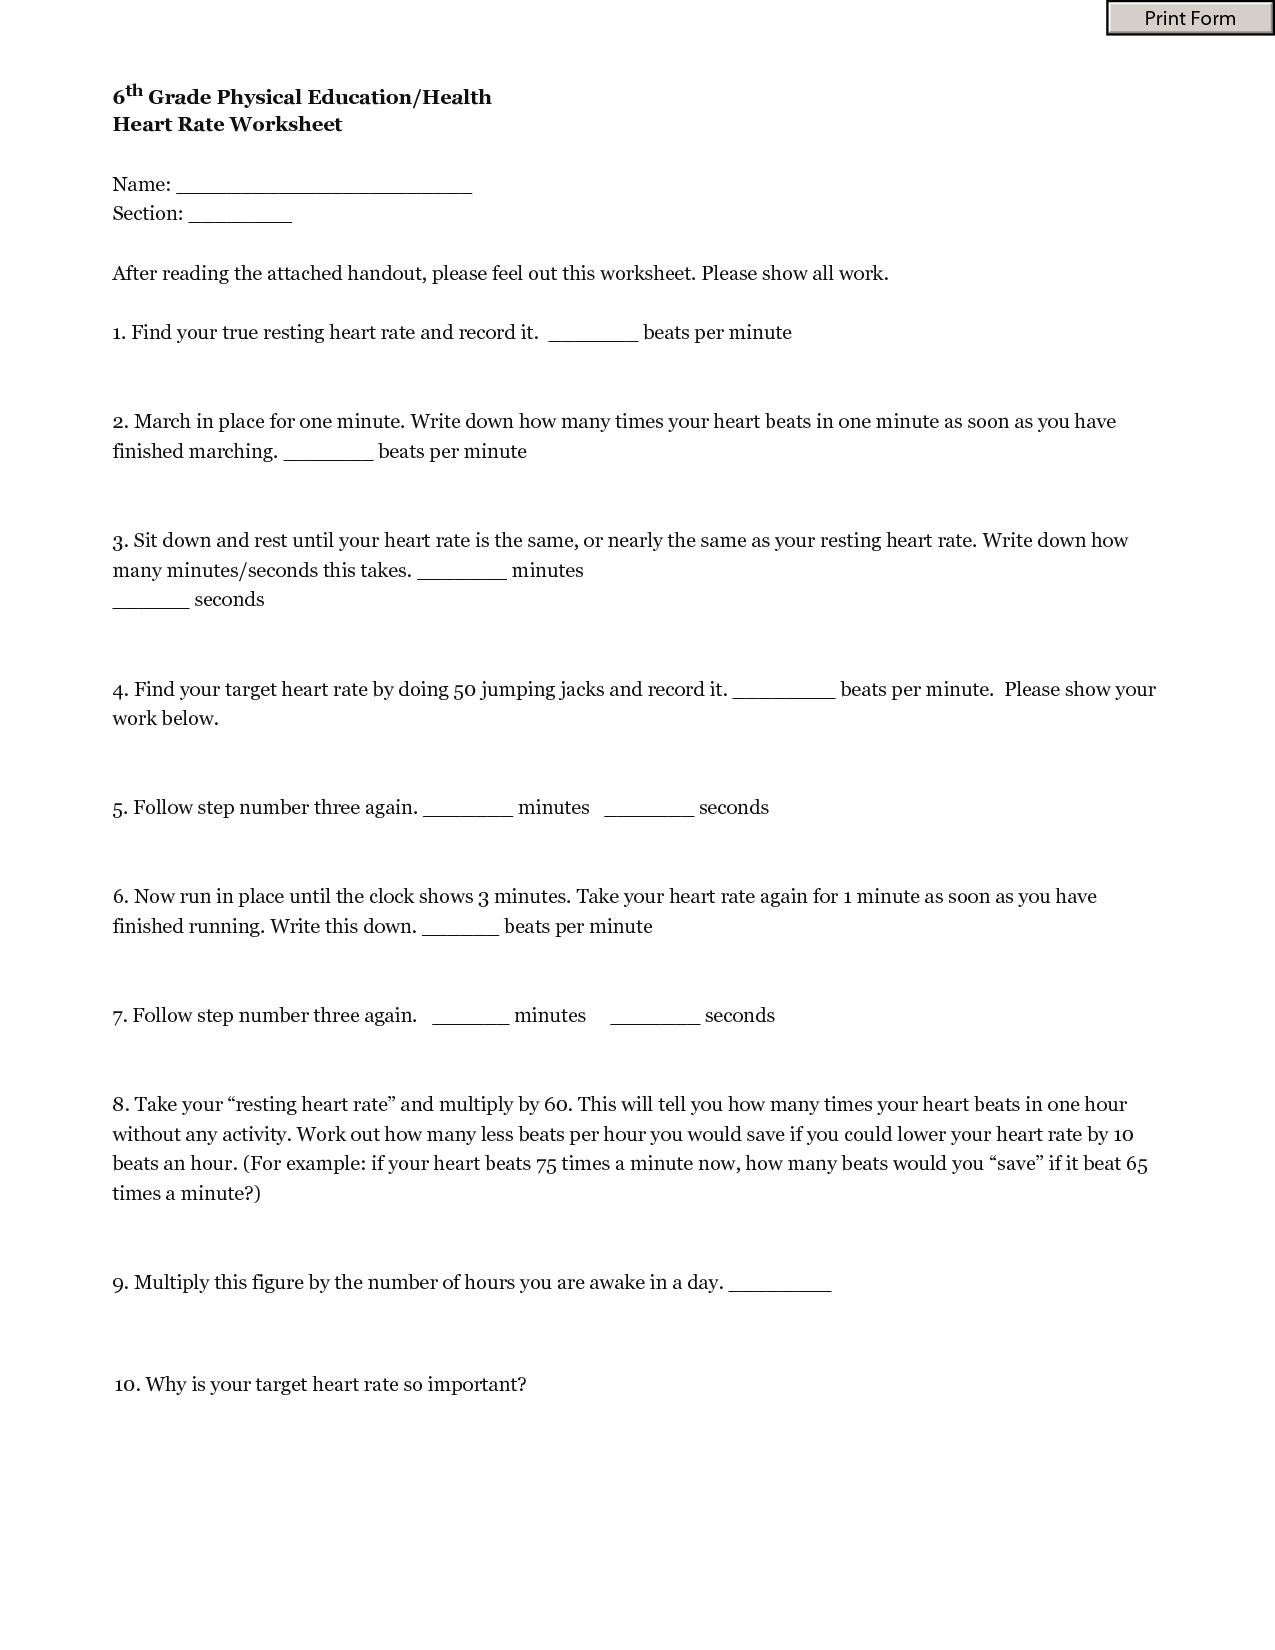 6th Grade Physical Education Worksheets